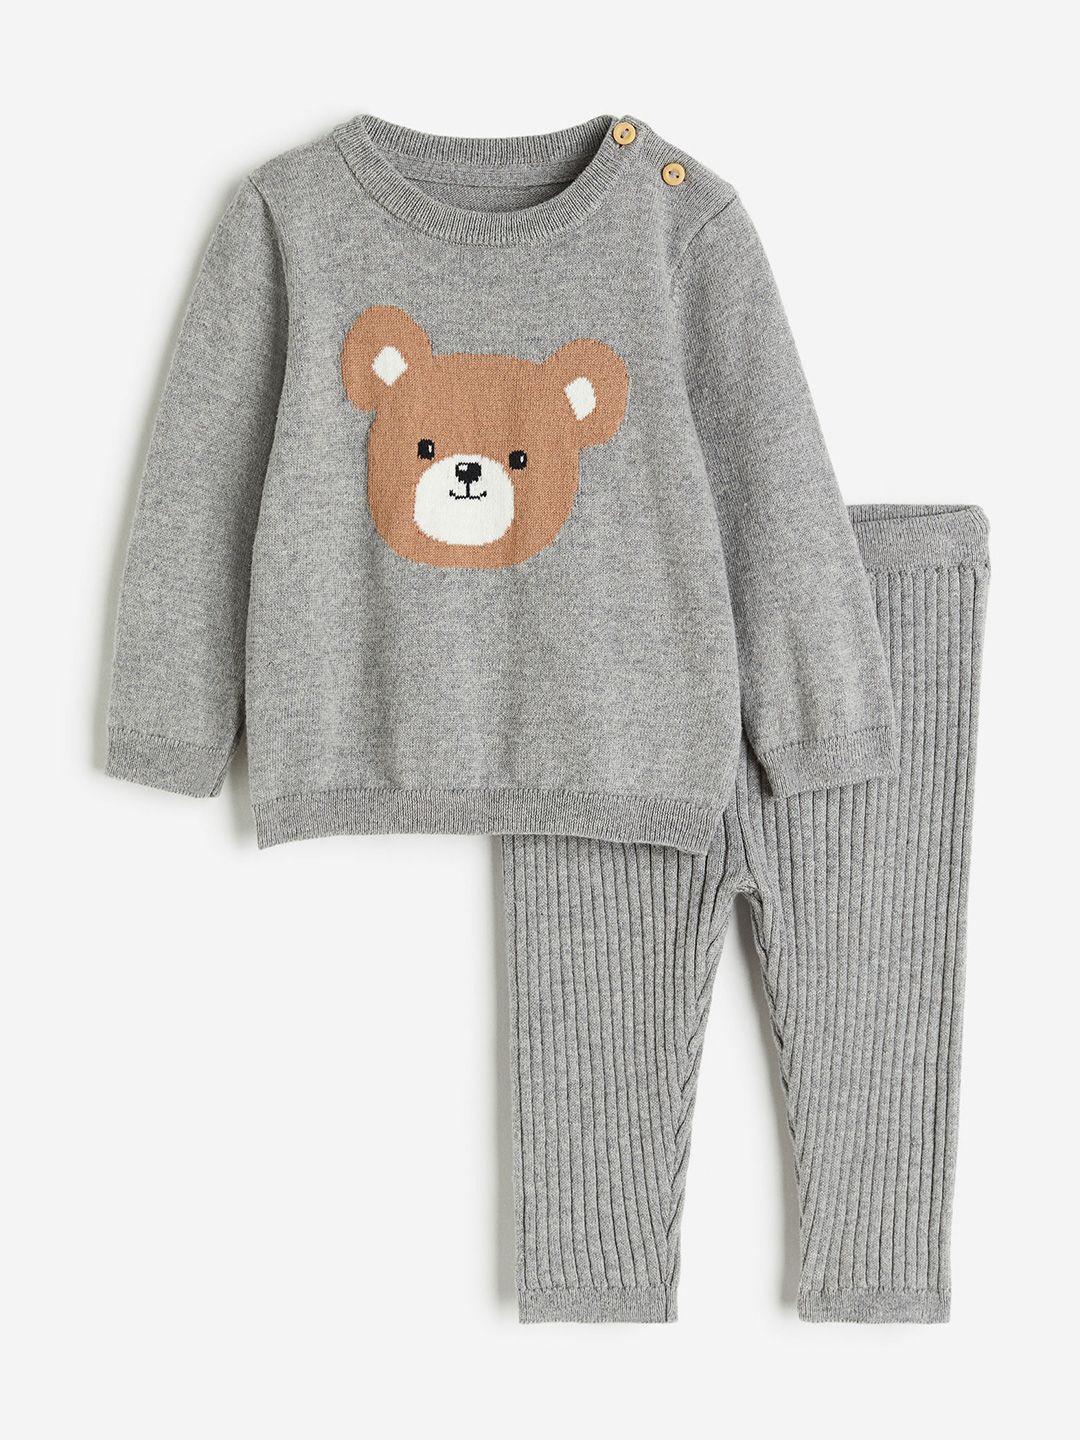 h&m boys pure cotton 2-piece knitted set